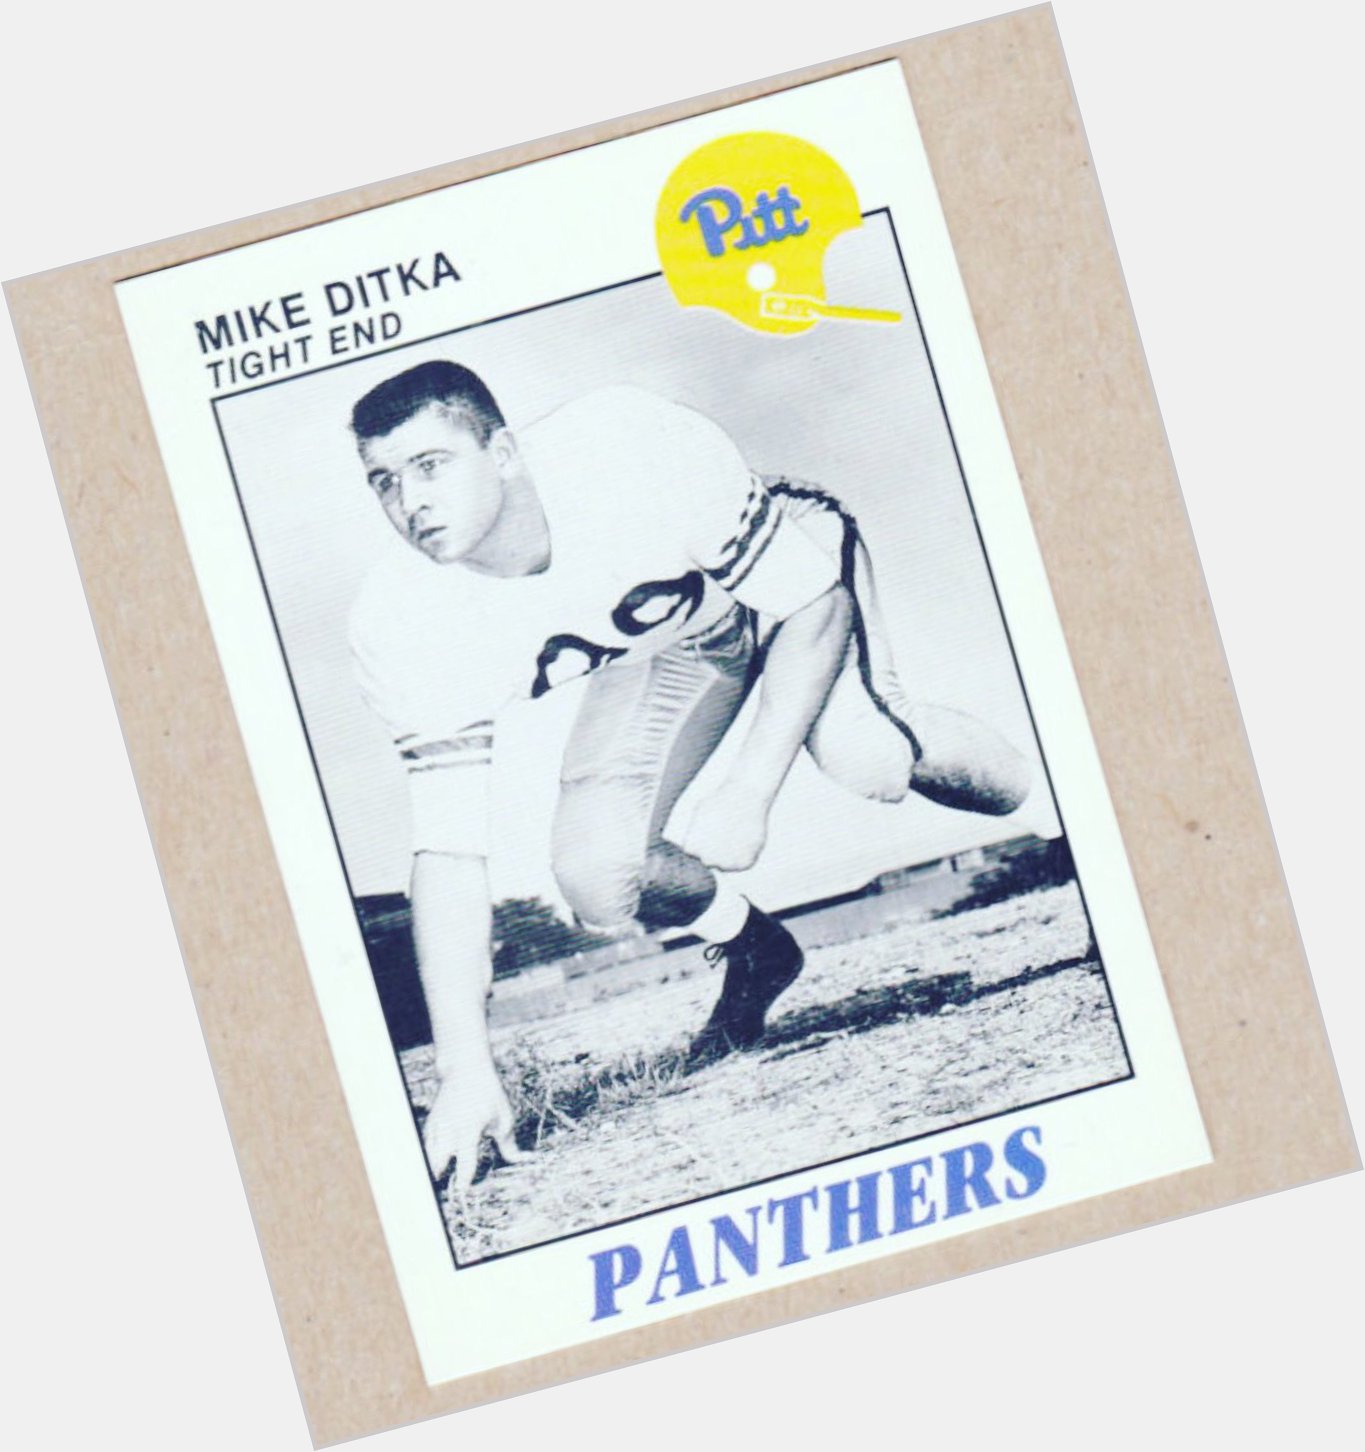 10/18/21. 48th day of school. 132 to go. Happy Birthday Mike Ditka 1939 